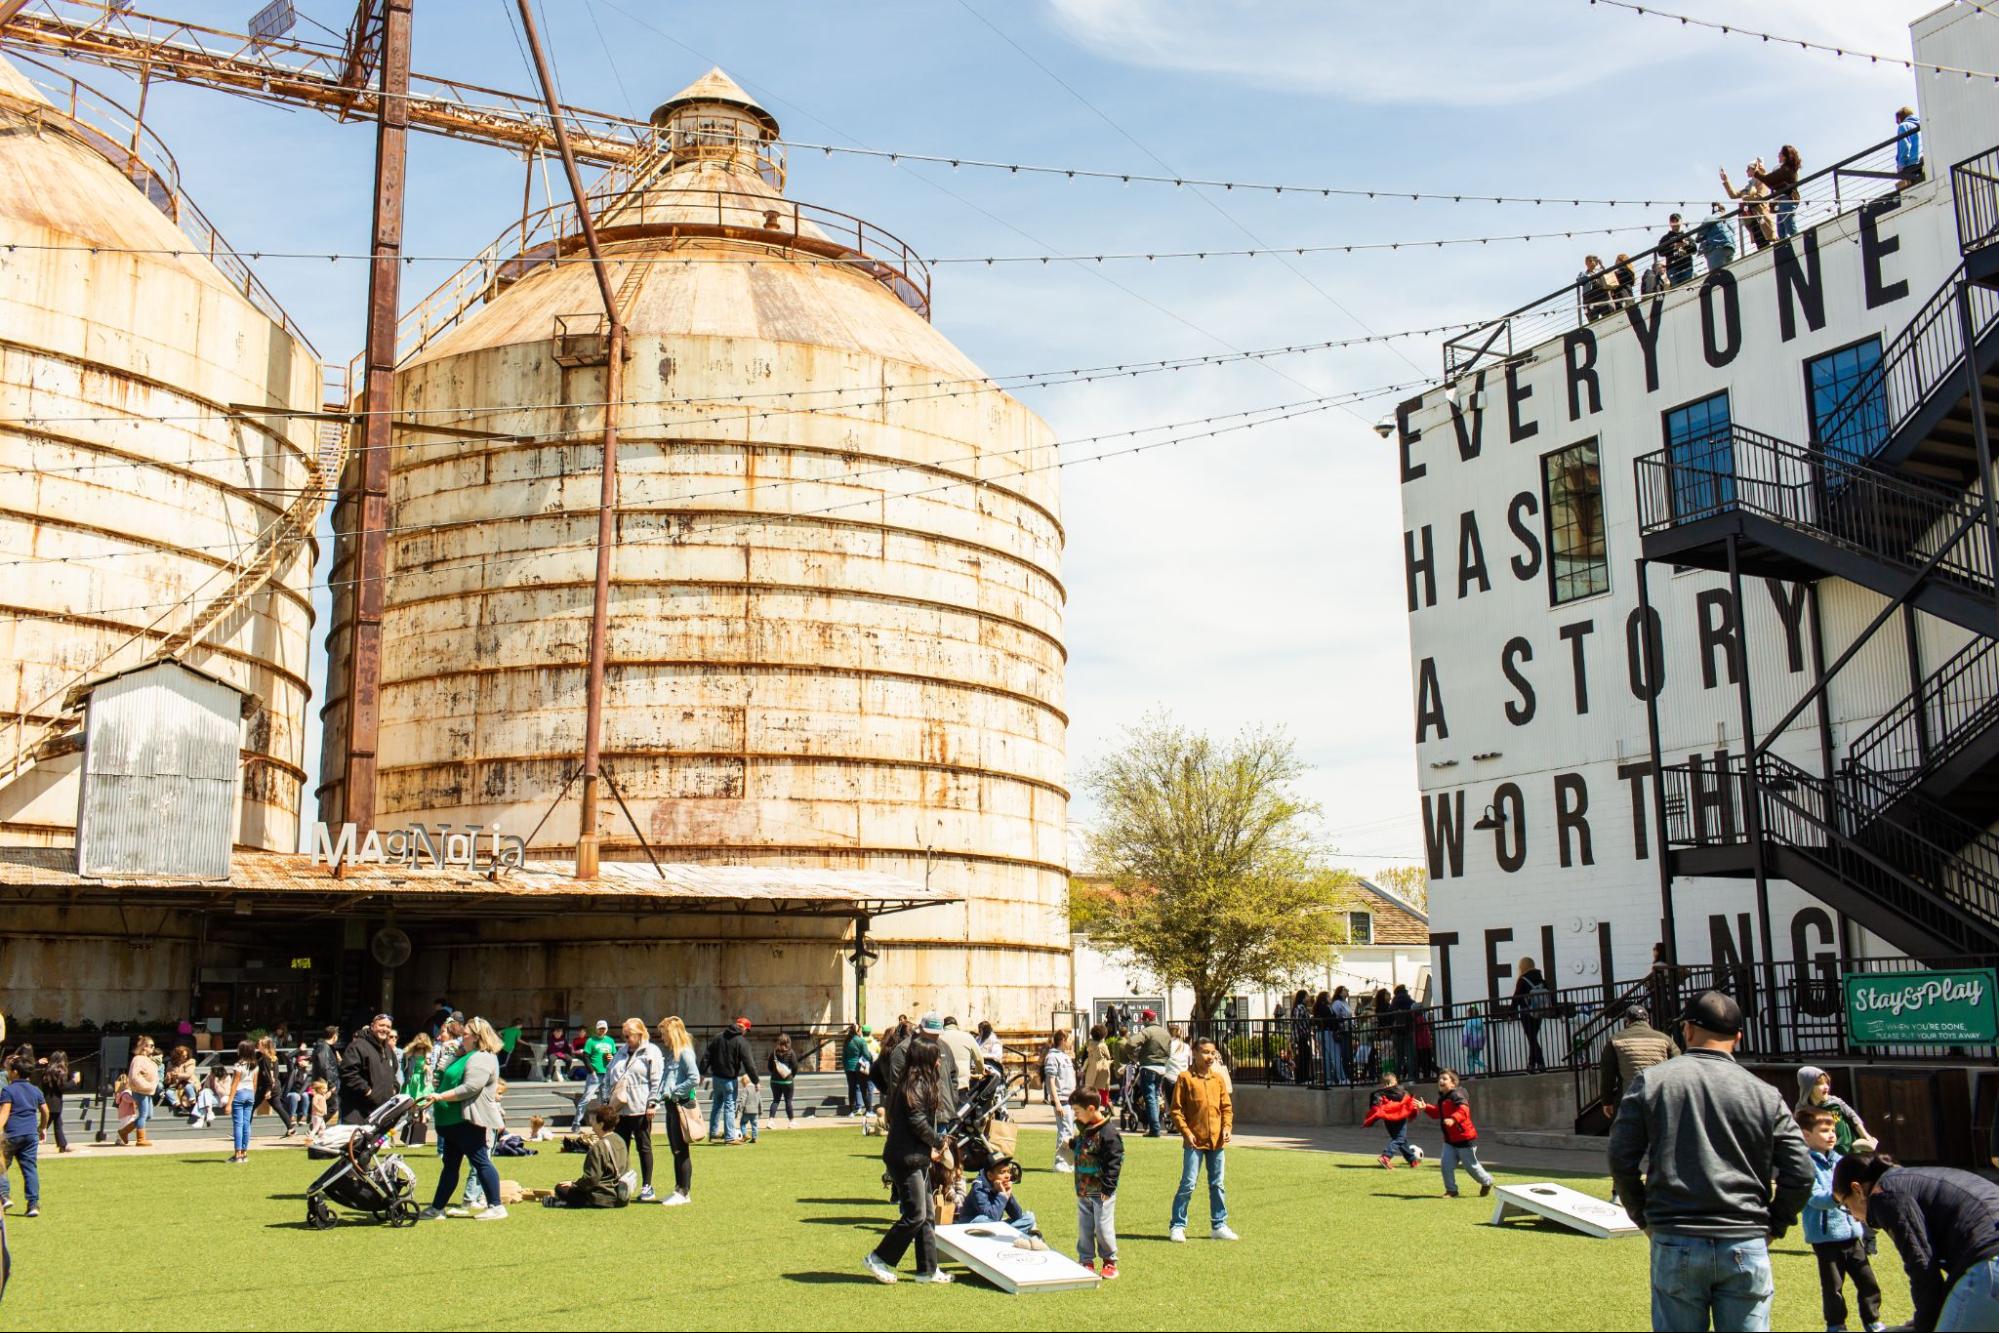 The Magnolia Silos stand in front of a green lawn surrounded by people in Waco, Texas.